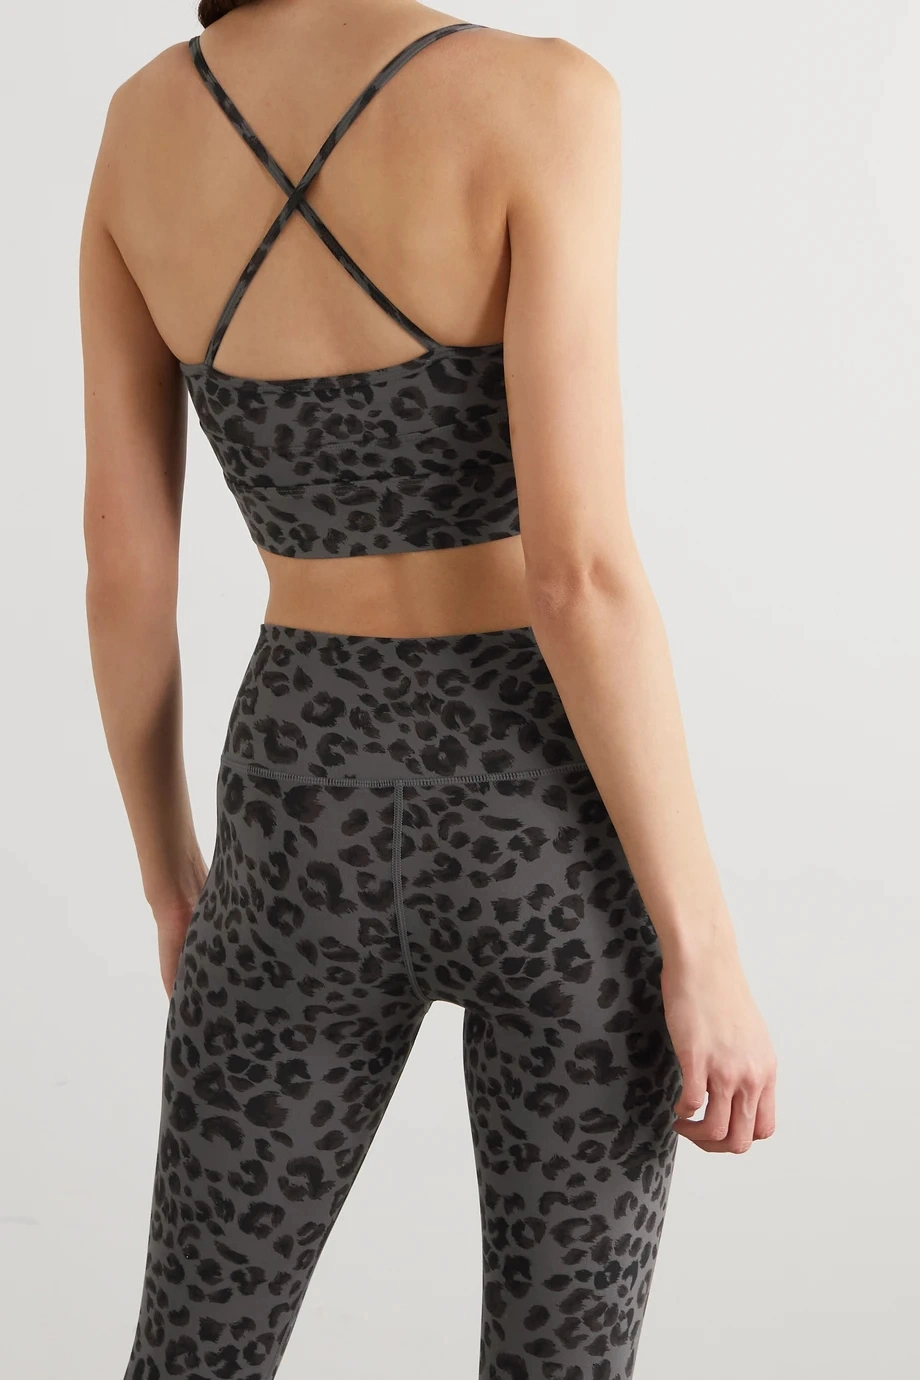 Women Leopard Print Bra and Leggings Sets Activewear for Yoga, Gym Climbing and Bicycle Recycle Fabric